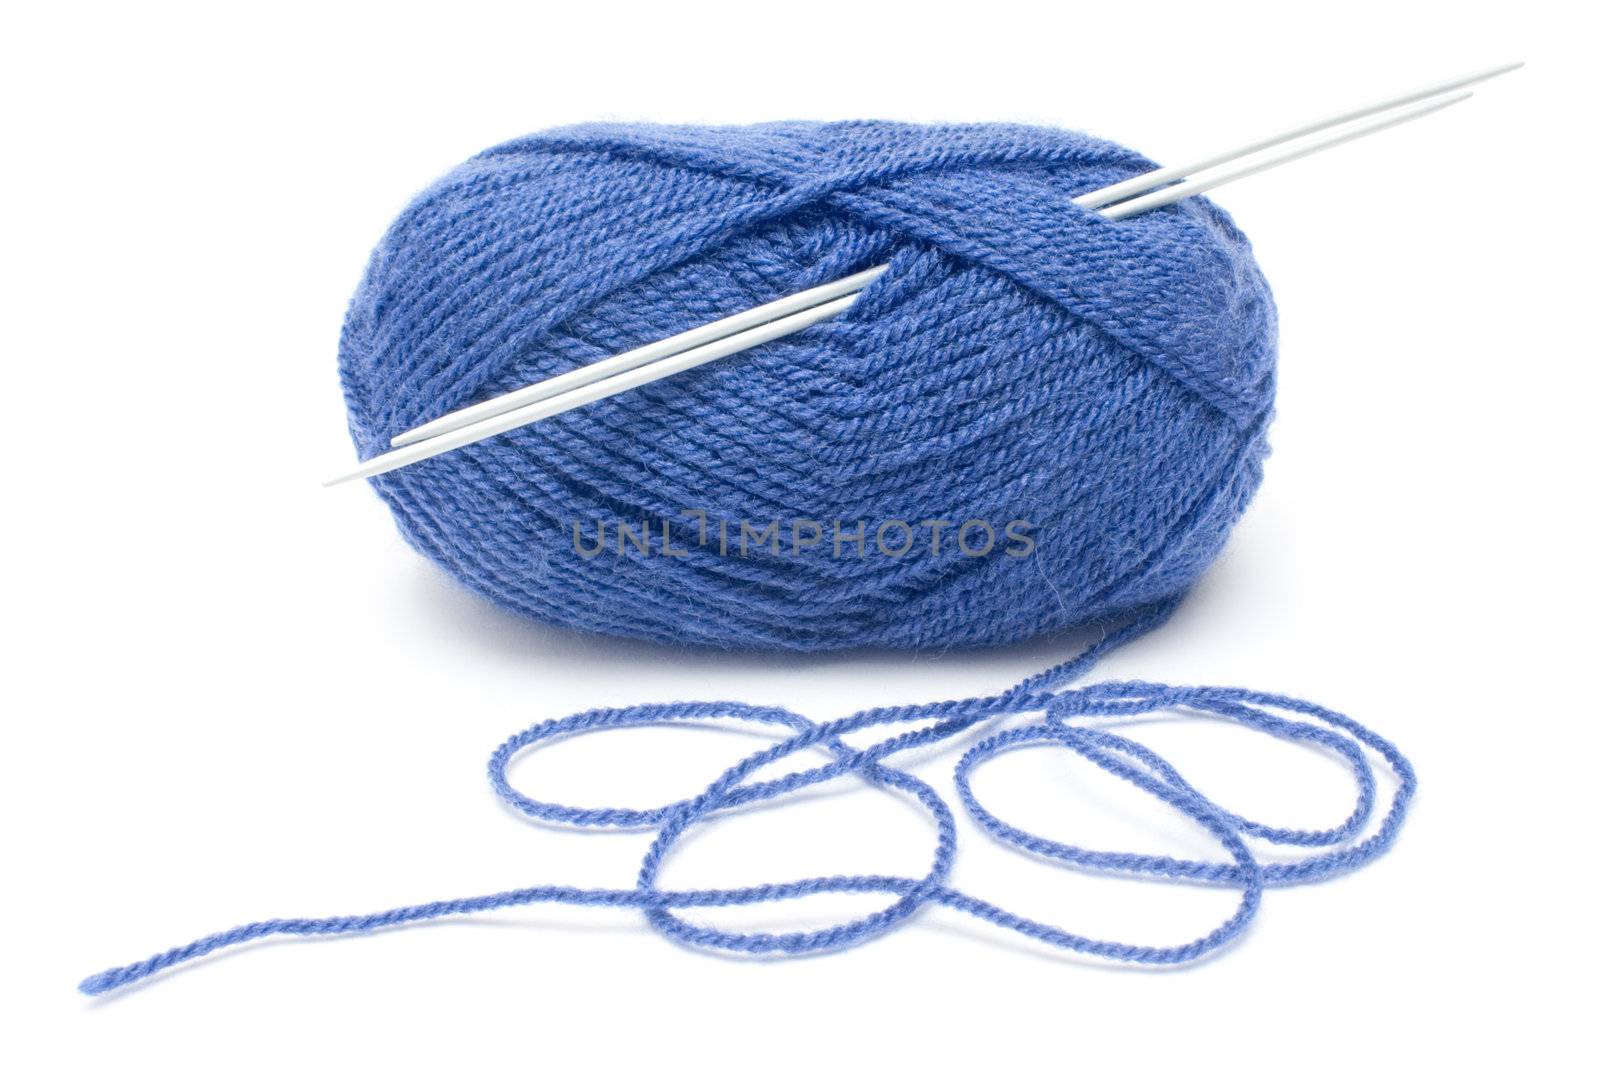 Blue Wool and Needles by winterling